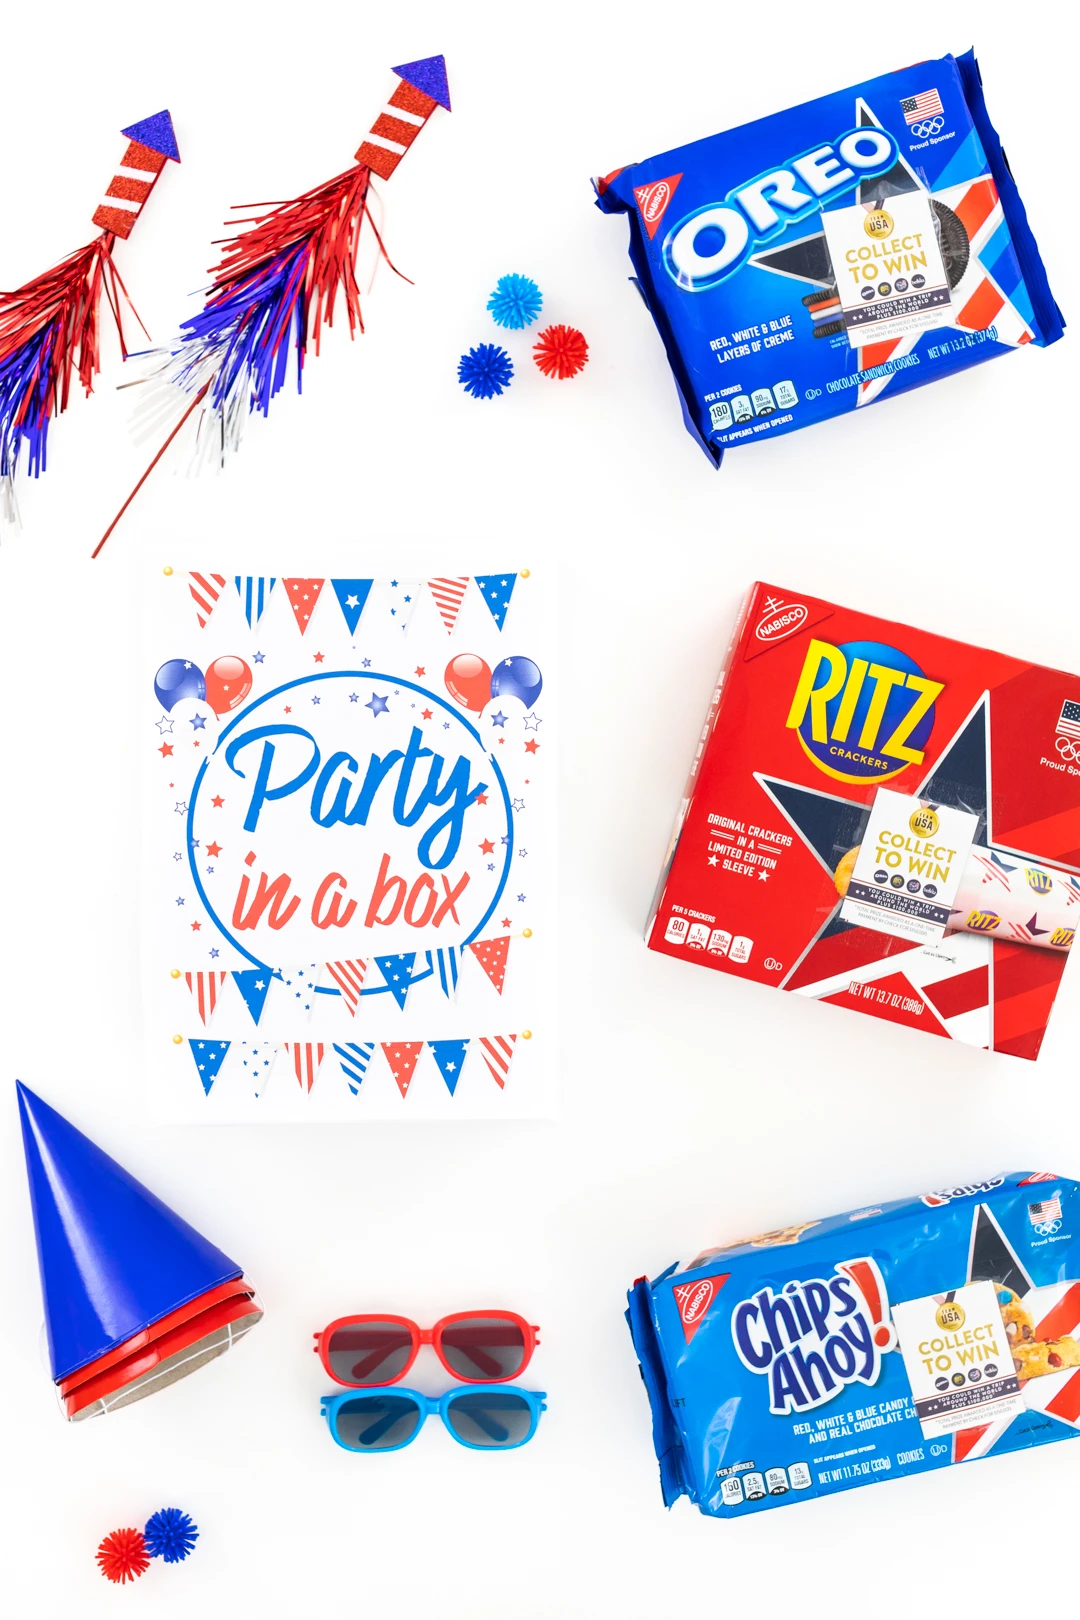 Party in a box for 4th of july